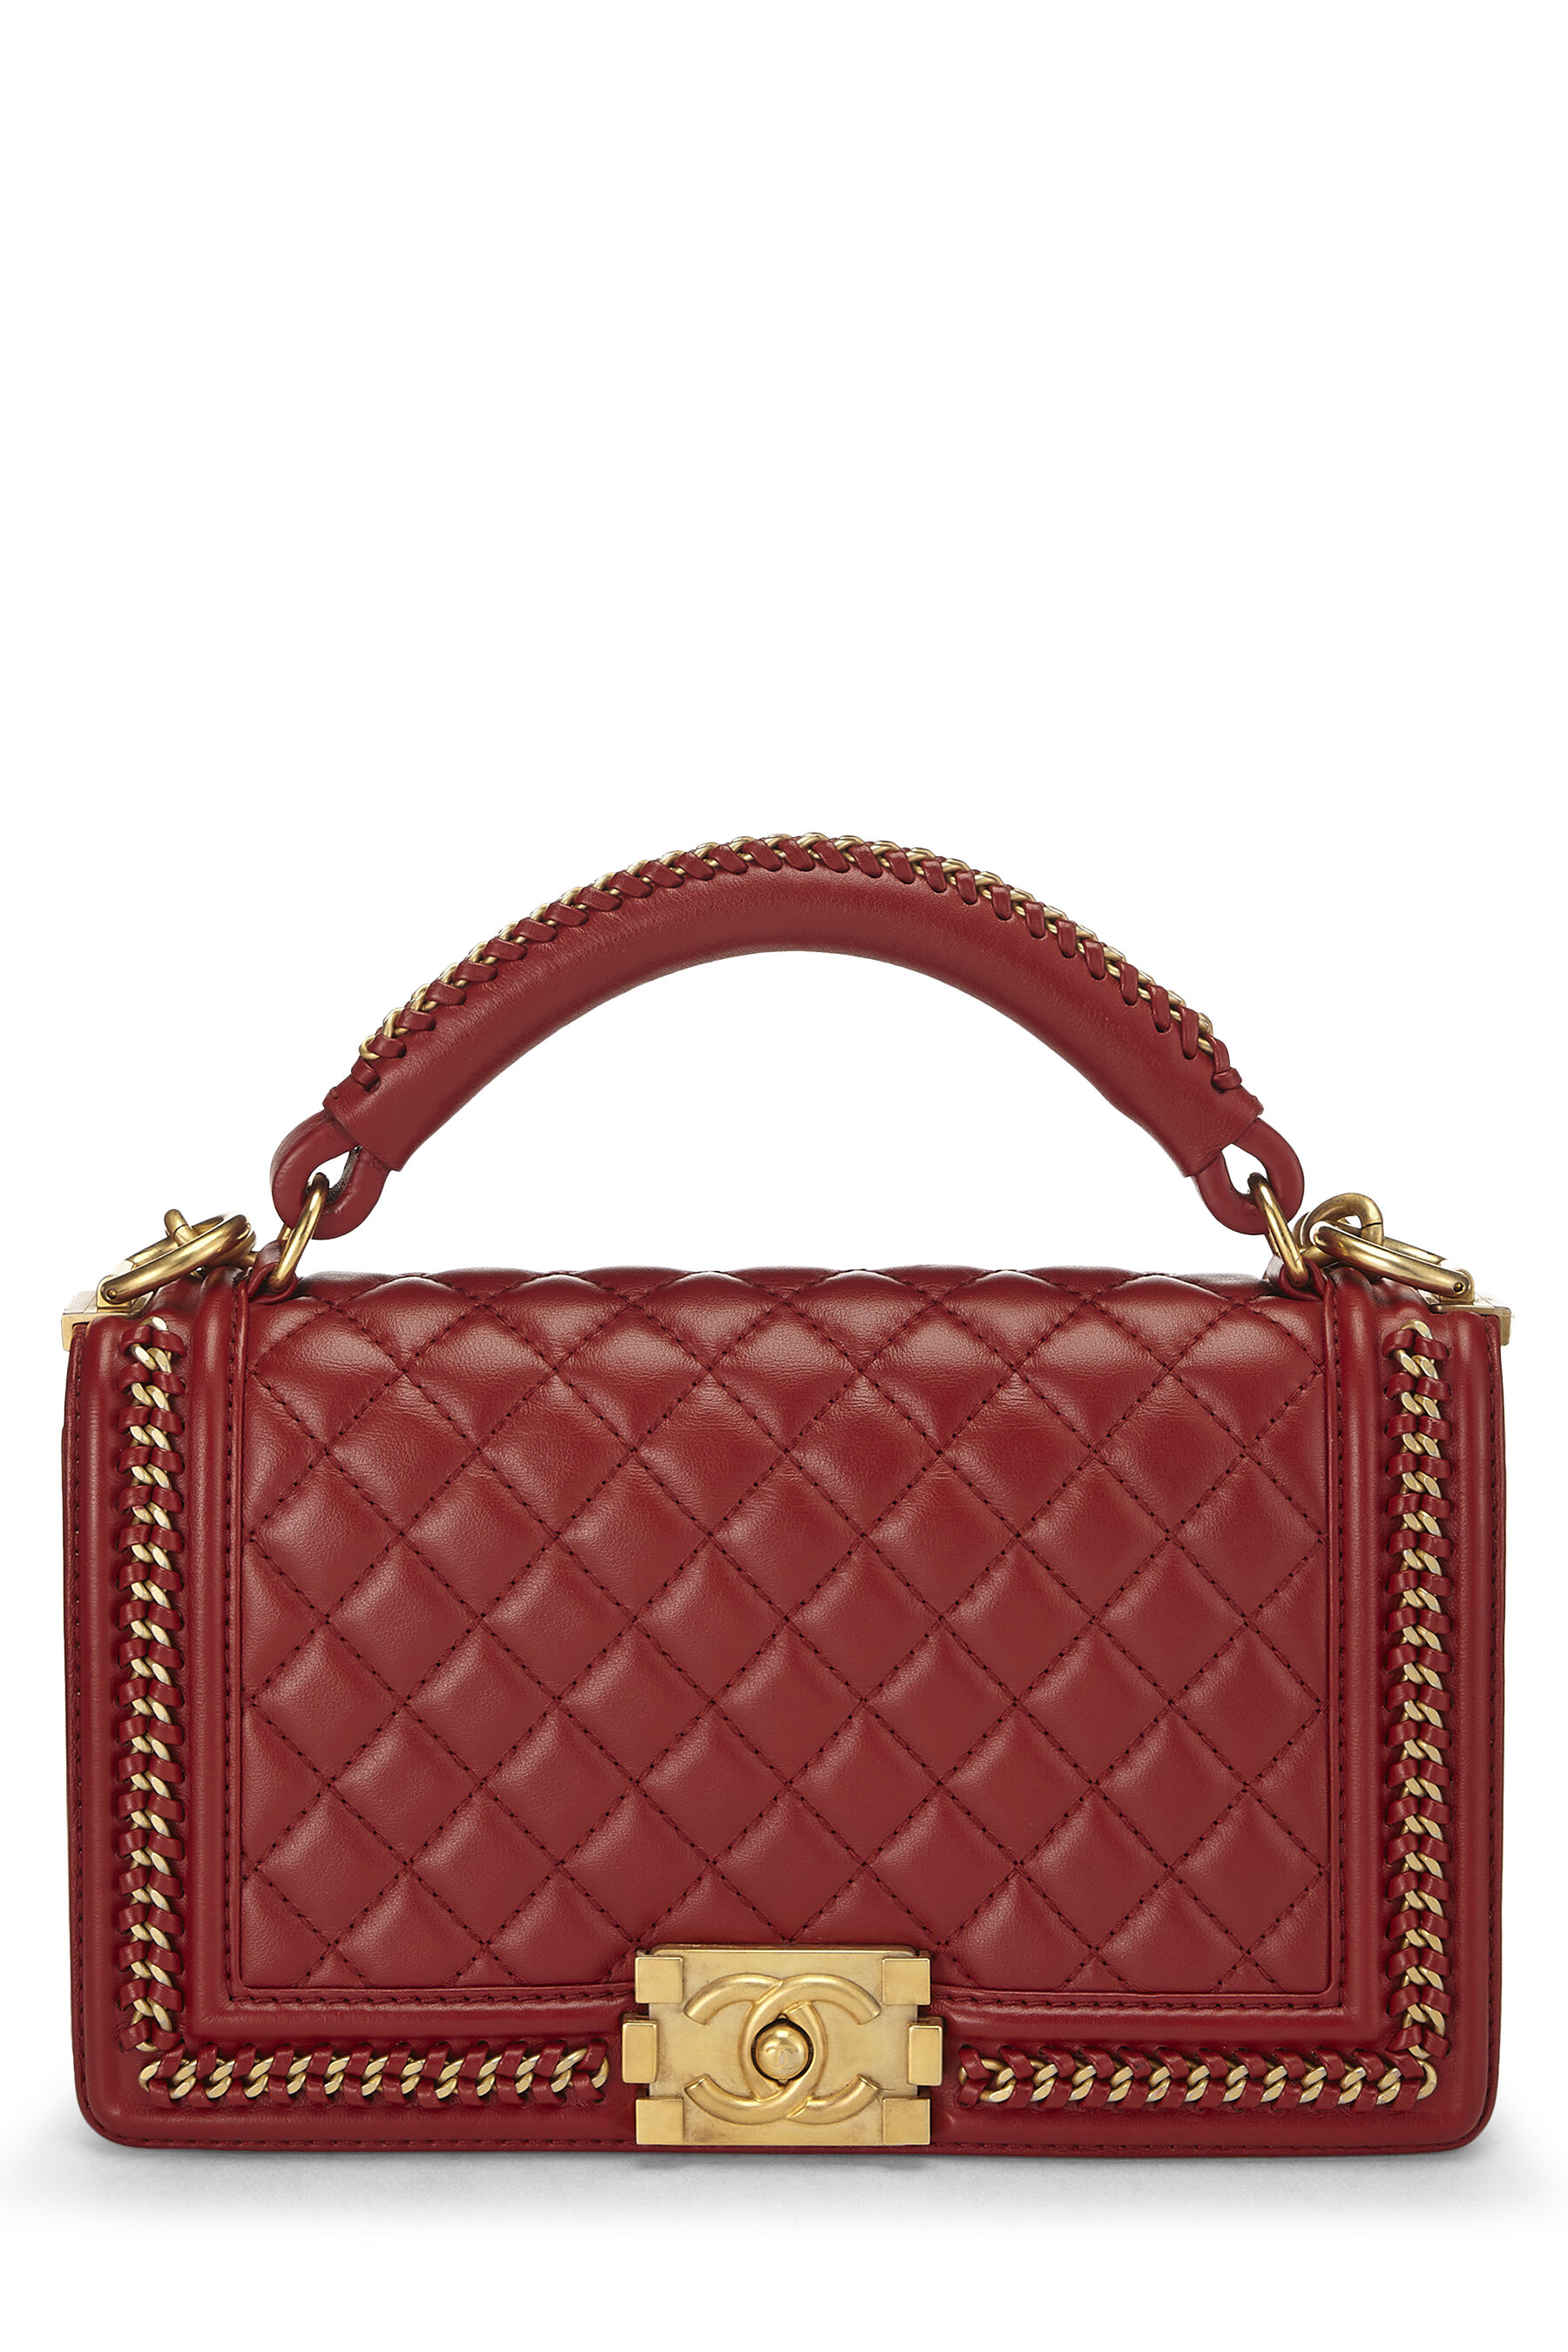 Chanel - Red Quilted Calfskin Top Handle Boy Bag Medium